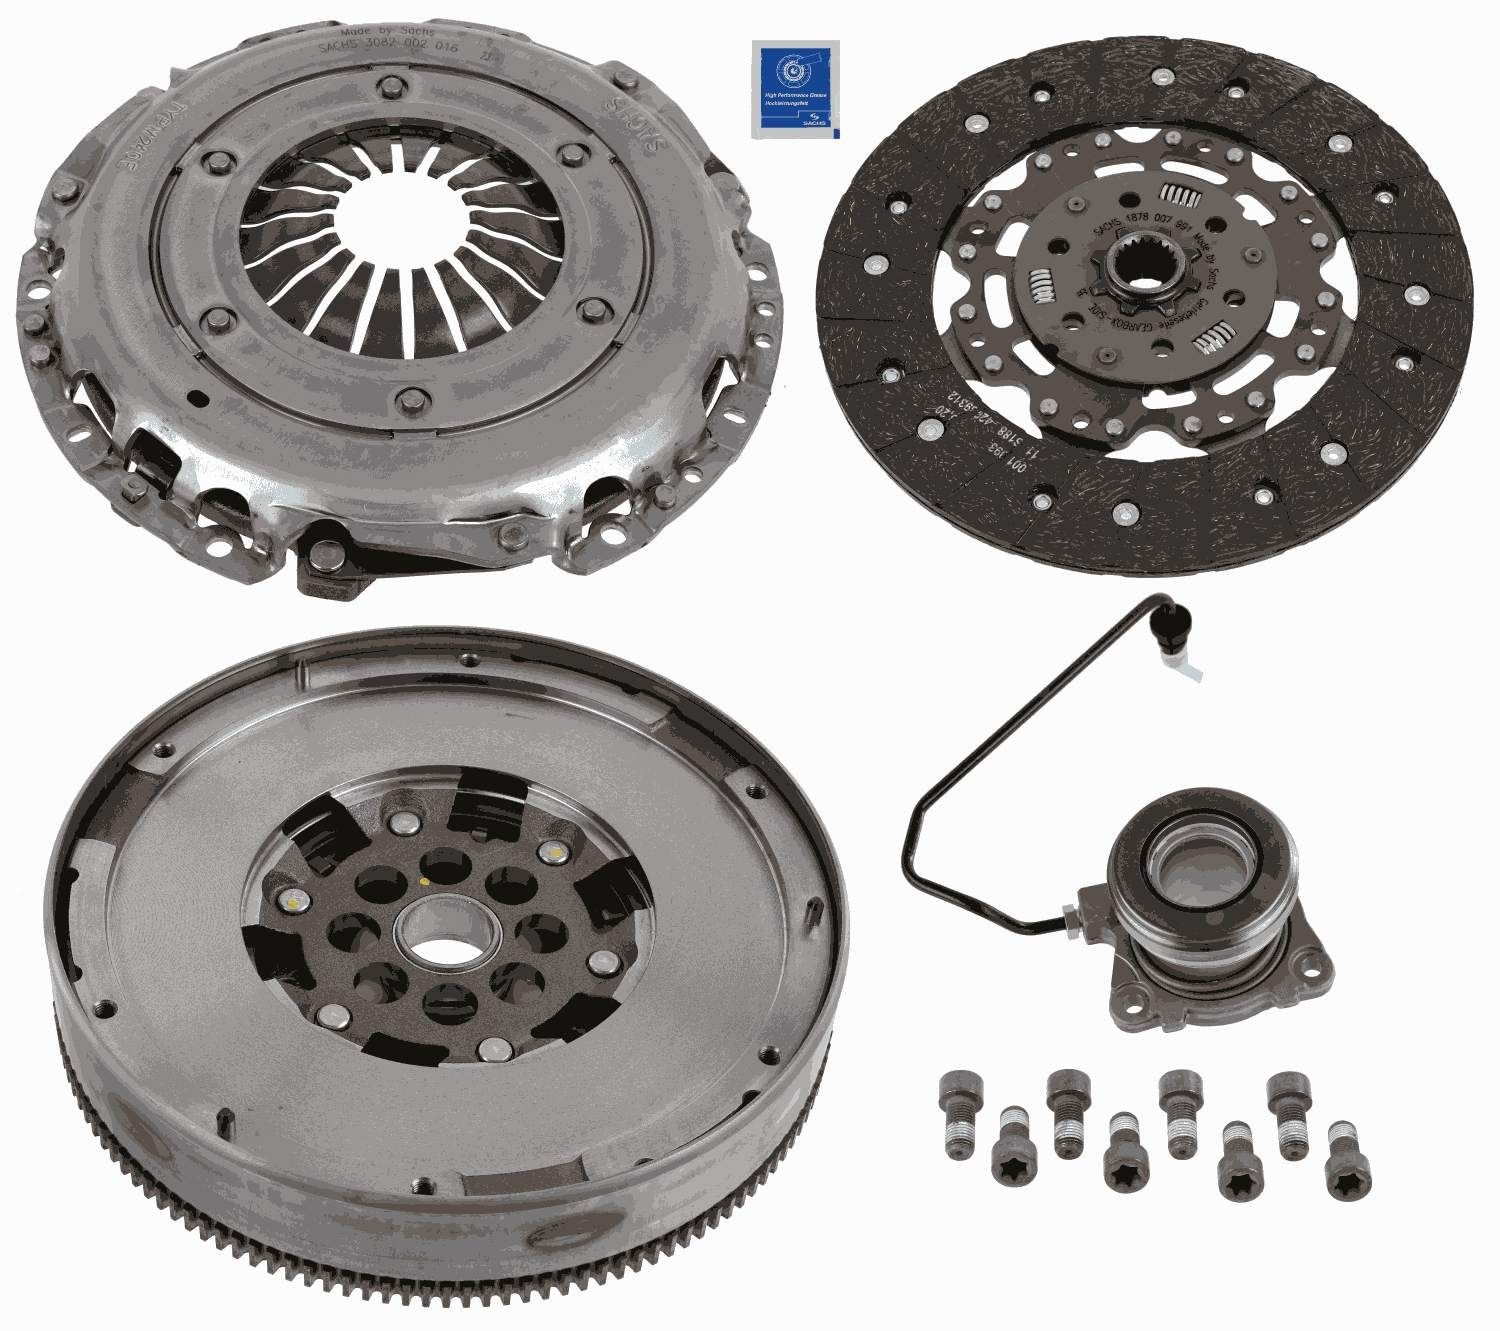 2290 601 142 SACHS Clutch set CHEVROLET with central slave cylinder, with clutch pressure plate, with dual-mass flywheel, with flywheel screws, with clutch disc, 240mm